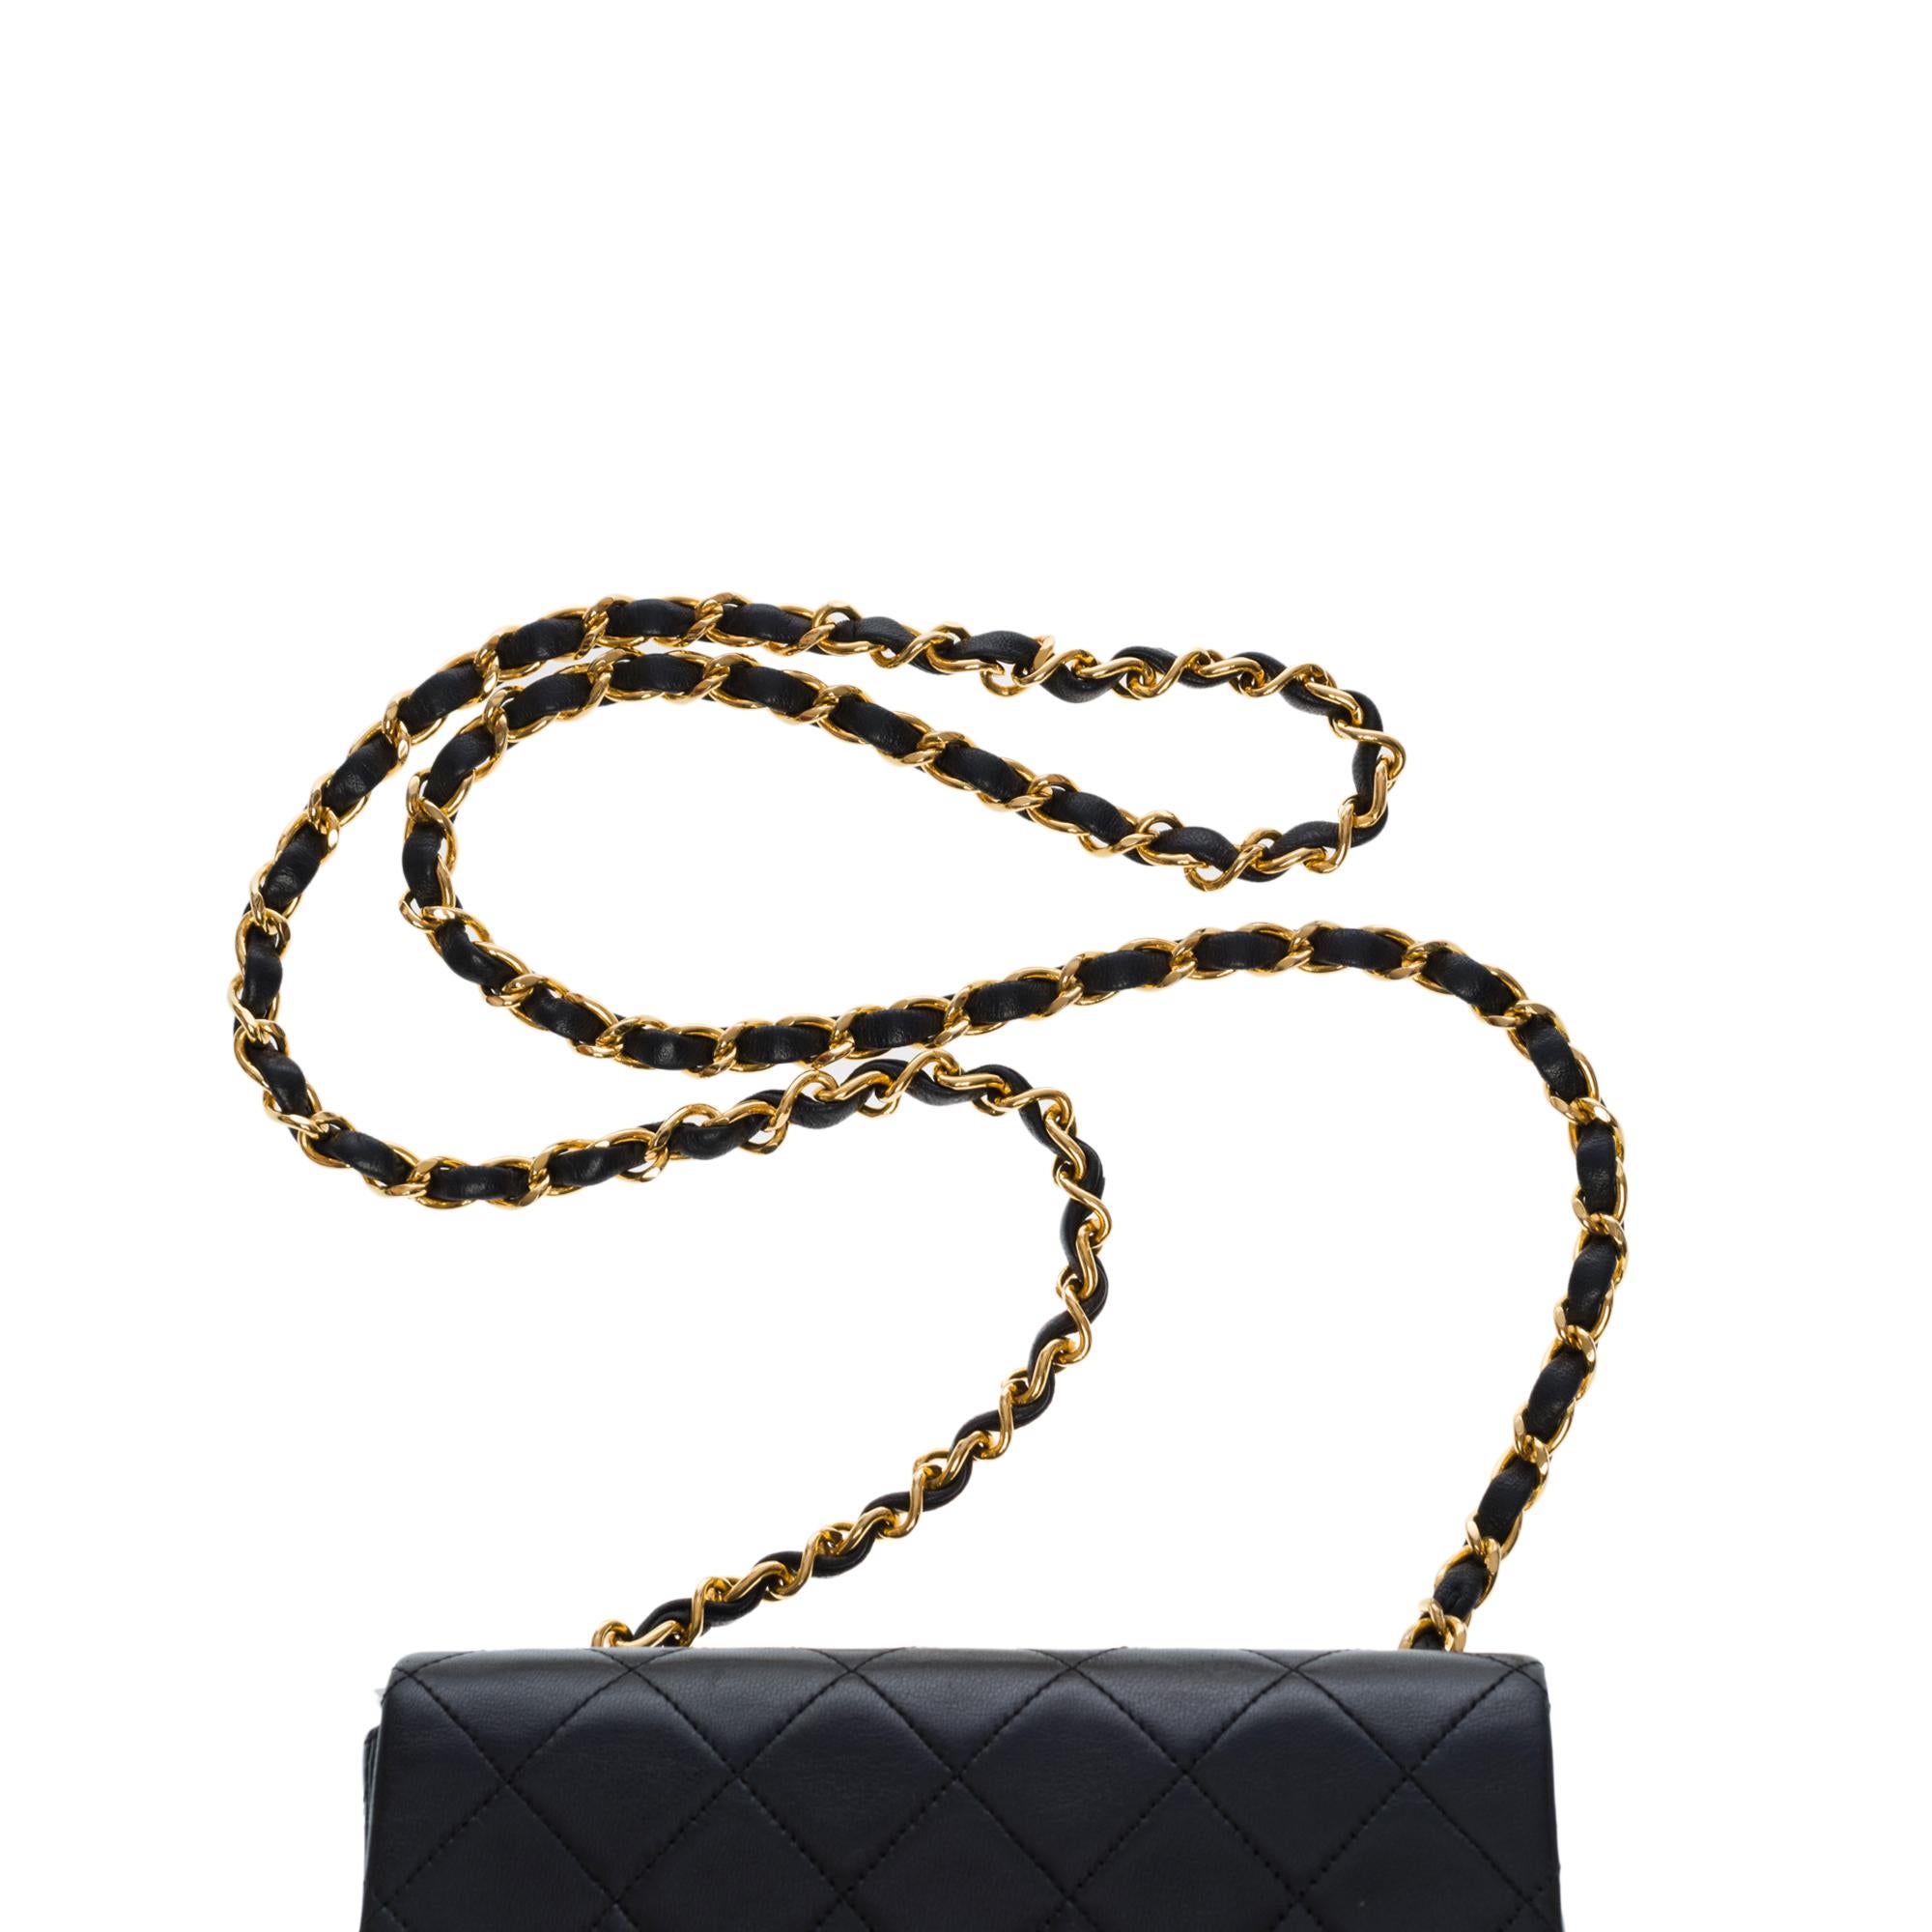 Chanel Mini Timeless flap shoulder bag in black quilted lambskin,  GHW 4